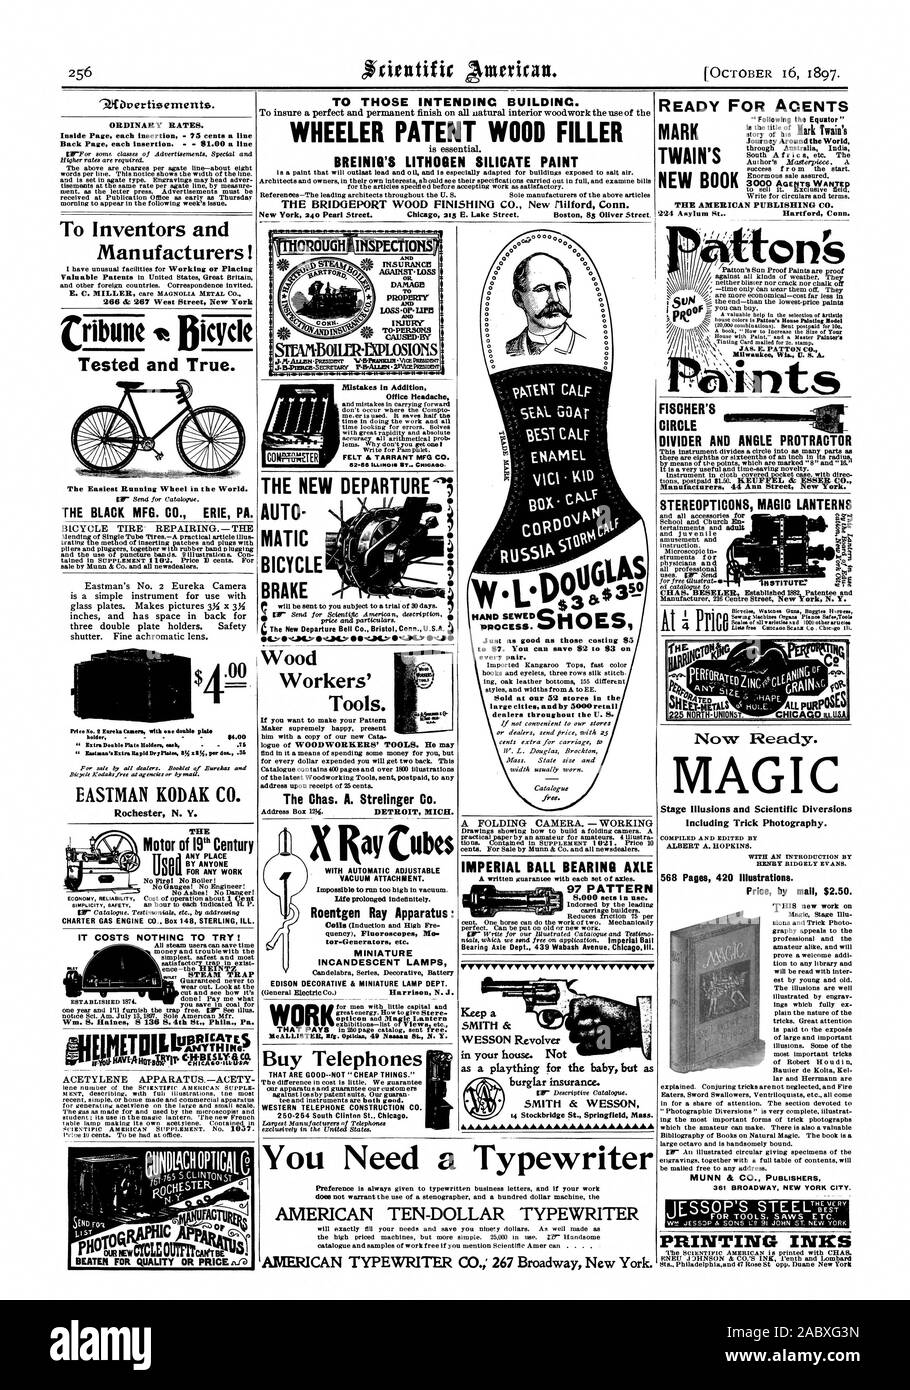 ORDINARY RATES. Inside Page each insertion - 75 cents a line Back Page each insertion.  81.00 a line To Inventors and Manufacturers! 266 & 267 West Street New York Cribune Bicycle Tested and True. The Easiest Running Wheel in the World. THE BLACK MFG. CO. ERIE PA. ' Extra Double Plate Holdenoh   .76 ' Eastman's Extra Ea pH Dr yristea 71% a$% per doz. .66 EASTMAN KODAK CO. Rochester N. Y. THE ANY PLACE BY ANYONE FOR ANY WORK CHARTER GAS ENGINE CO Box 148 STERLING ILL. Mistakes in Addition Office Headache 62-55 ILLINOIS ST 61.1000. THE NEW DEPARTURE MATIC BICYCLE BRAKE Wood Workers' Tools. The Stock Photo